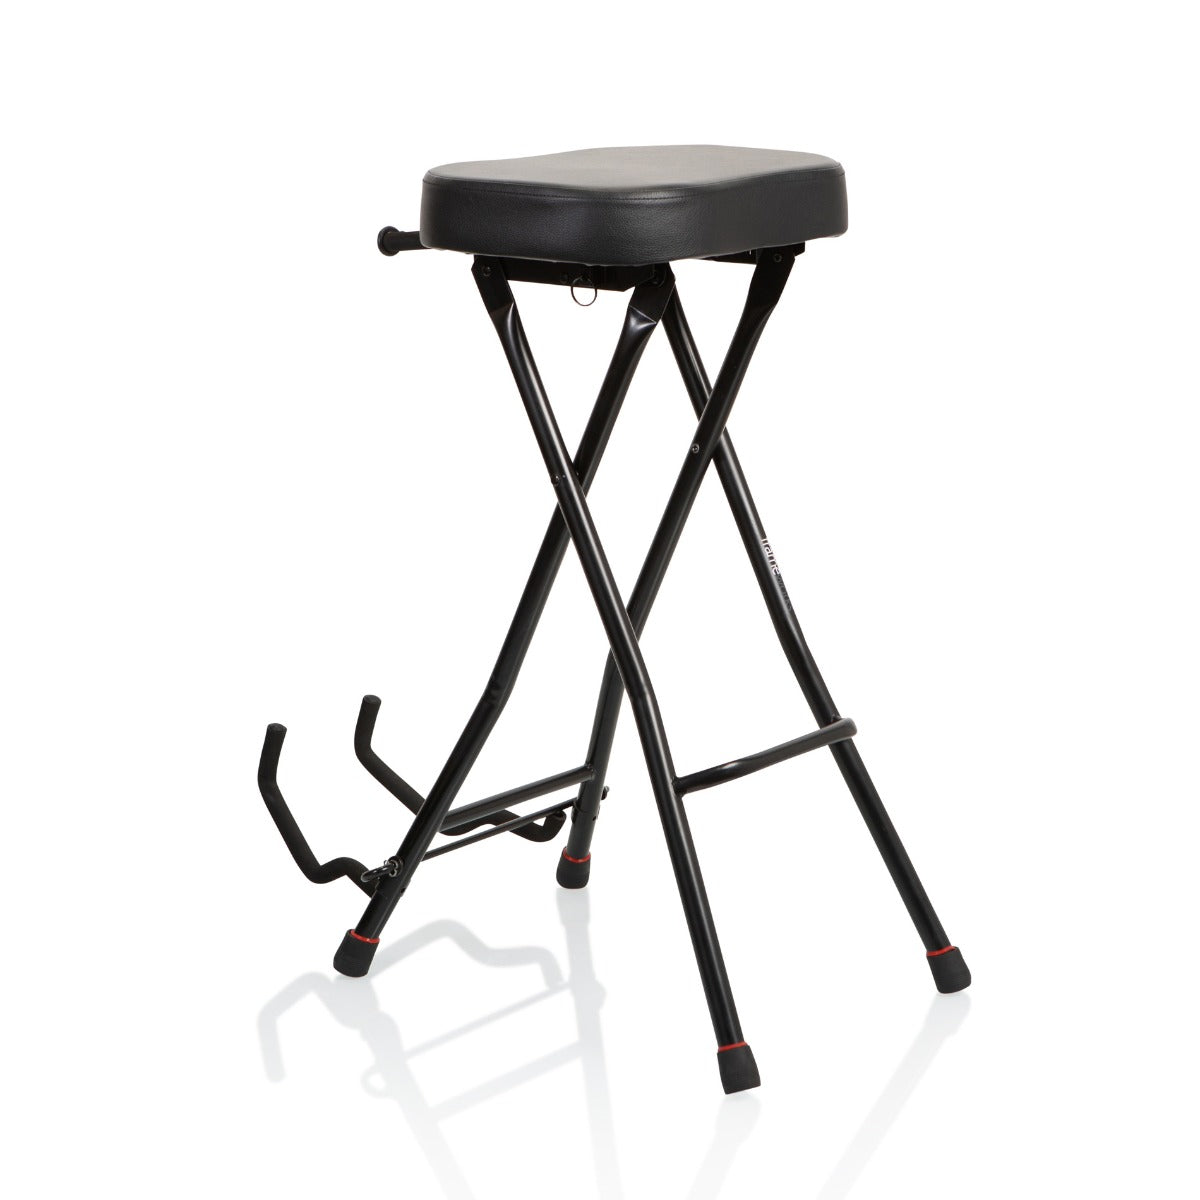 Rear angle of the Gator Frameworks Guitar Stool with Stand